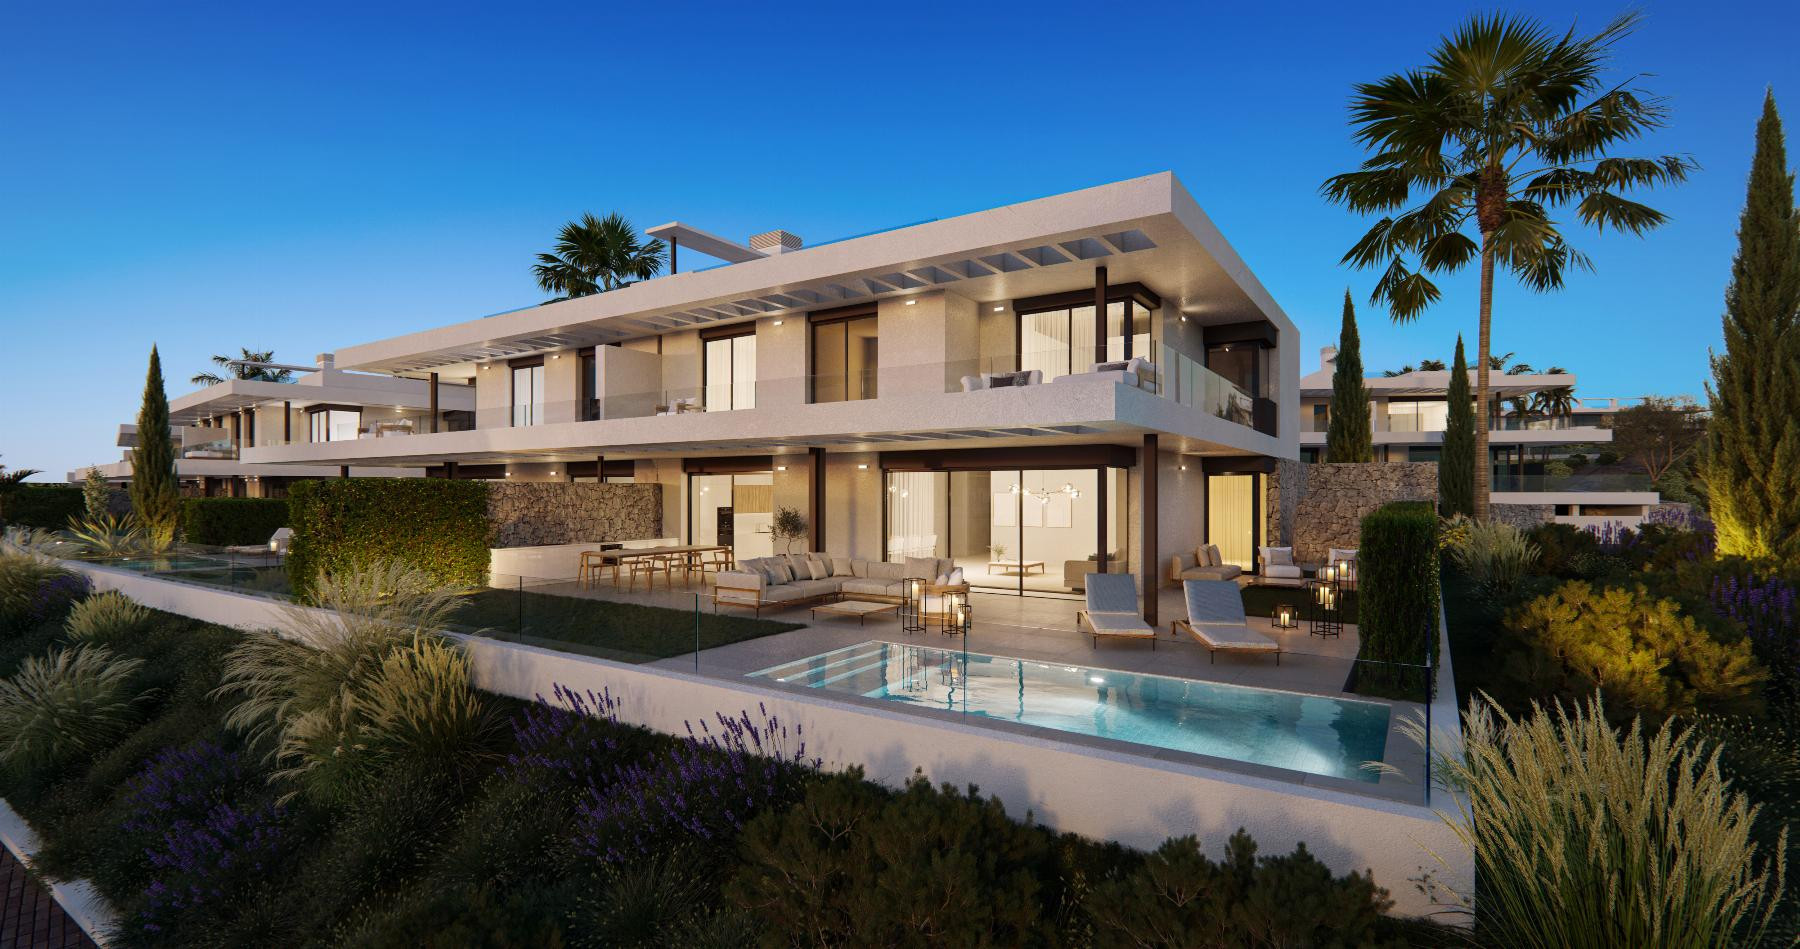 Stunning duplex penthouse in exclusive gated community 10 minutes from the center of Marbella and golf courses. | Image 14